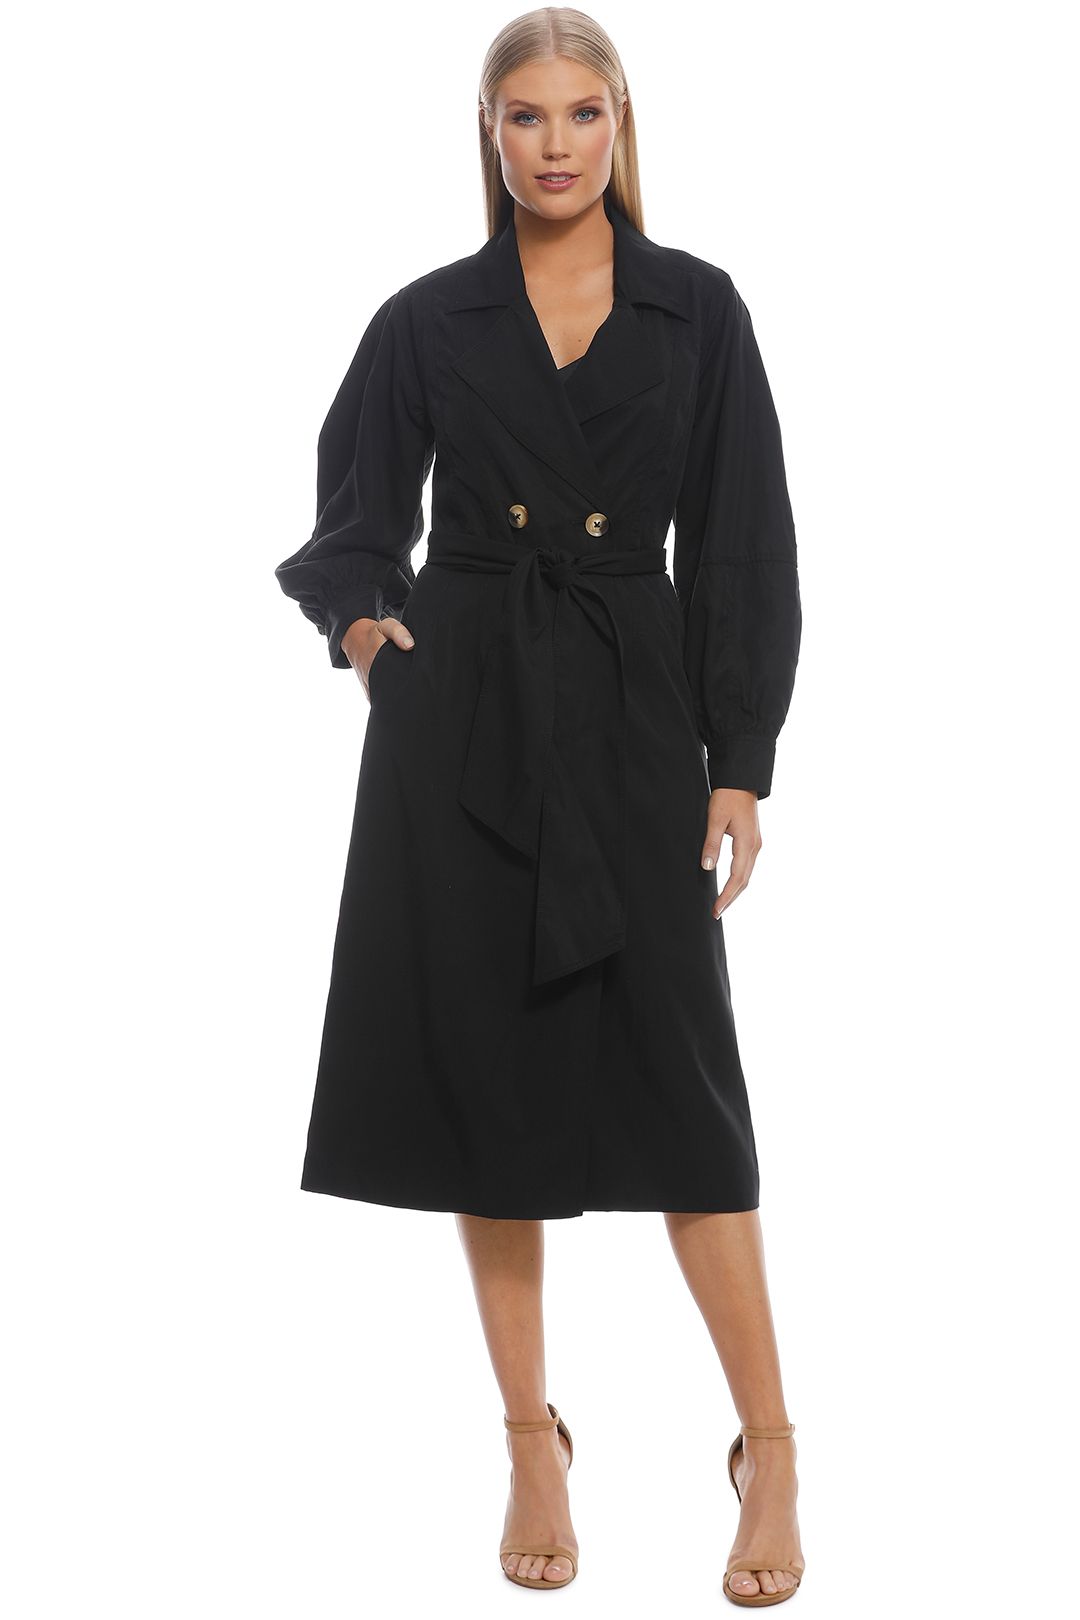 CMEO Collective - Affectation Trench - Black - Front